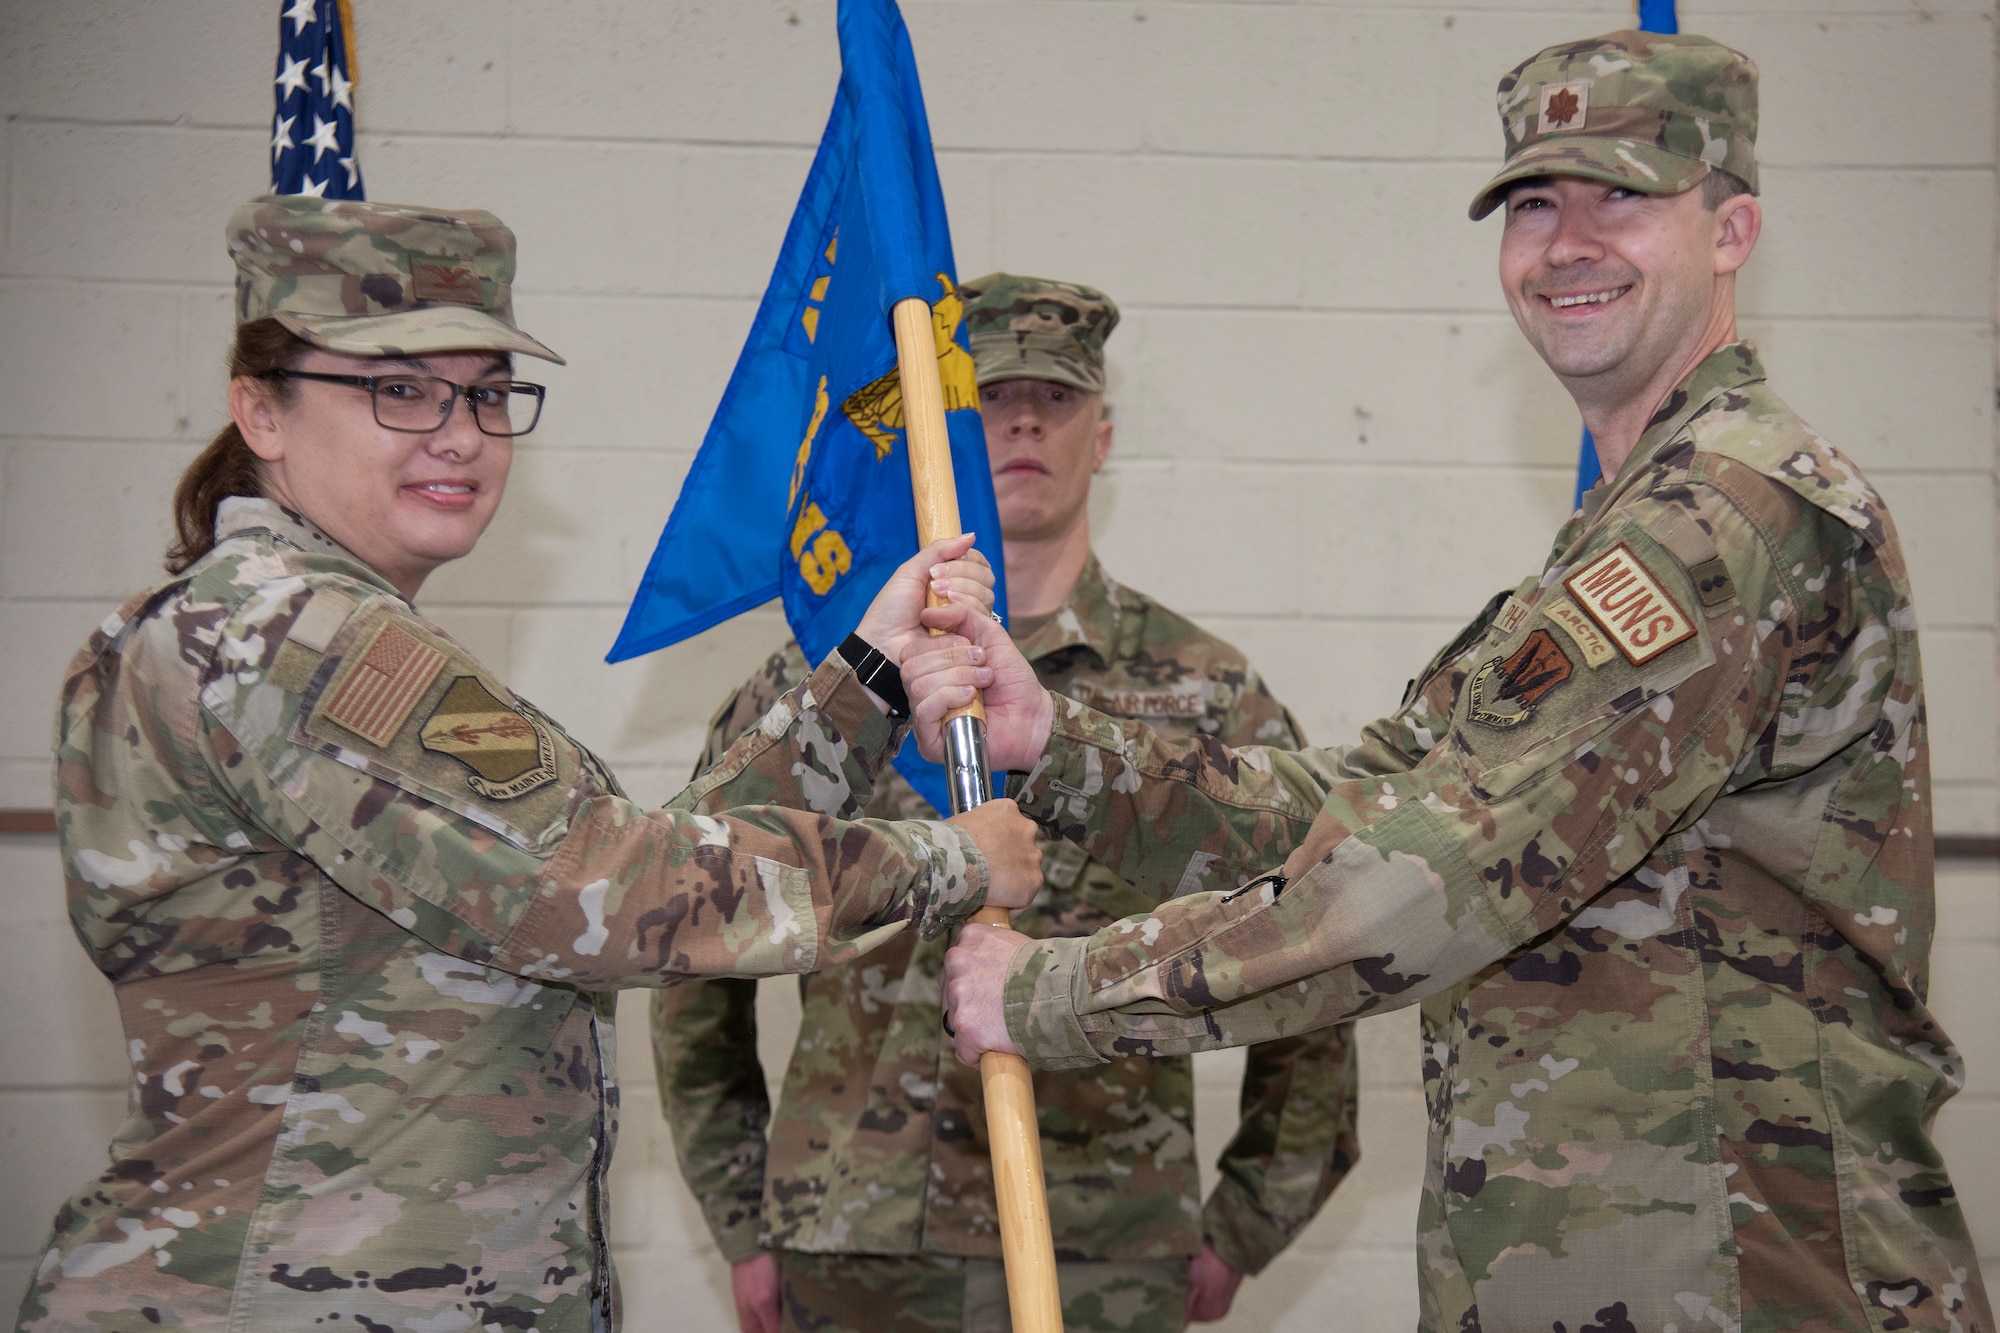 Maj. James Phillips, right, 4th Munitions Squadron incoming commander, assumes command of the 4th MUNS and receives the squadron’s guidon from Col. Kathryn Roman, 4th Maintenance Group commander, during the 4th MUNS change of command ceremony at Seymour Johnson Air Force Base, North Carolina, June 1, 2023. In keeping with tradition, the ceremony gave Lt. Col. Marvin Hinkson, 4th MUNS outgoing commander, a chance to bid his Airmen farewell, and allowed Phillips the opportunity to formally assume command of the squadron, meet the Airmen in his unit, and express his aspirations for the squadron’s future. (U.S. Air Force photo by Tech. Sgt. Christopher Hubenthal)